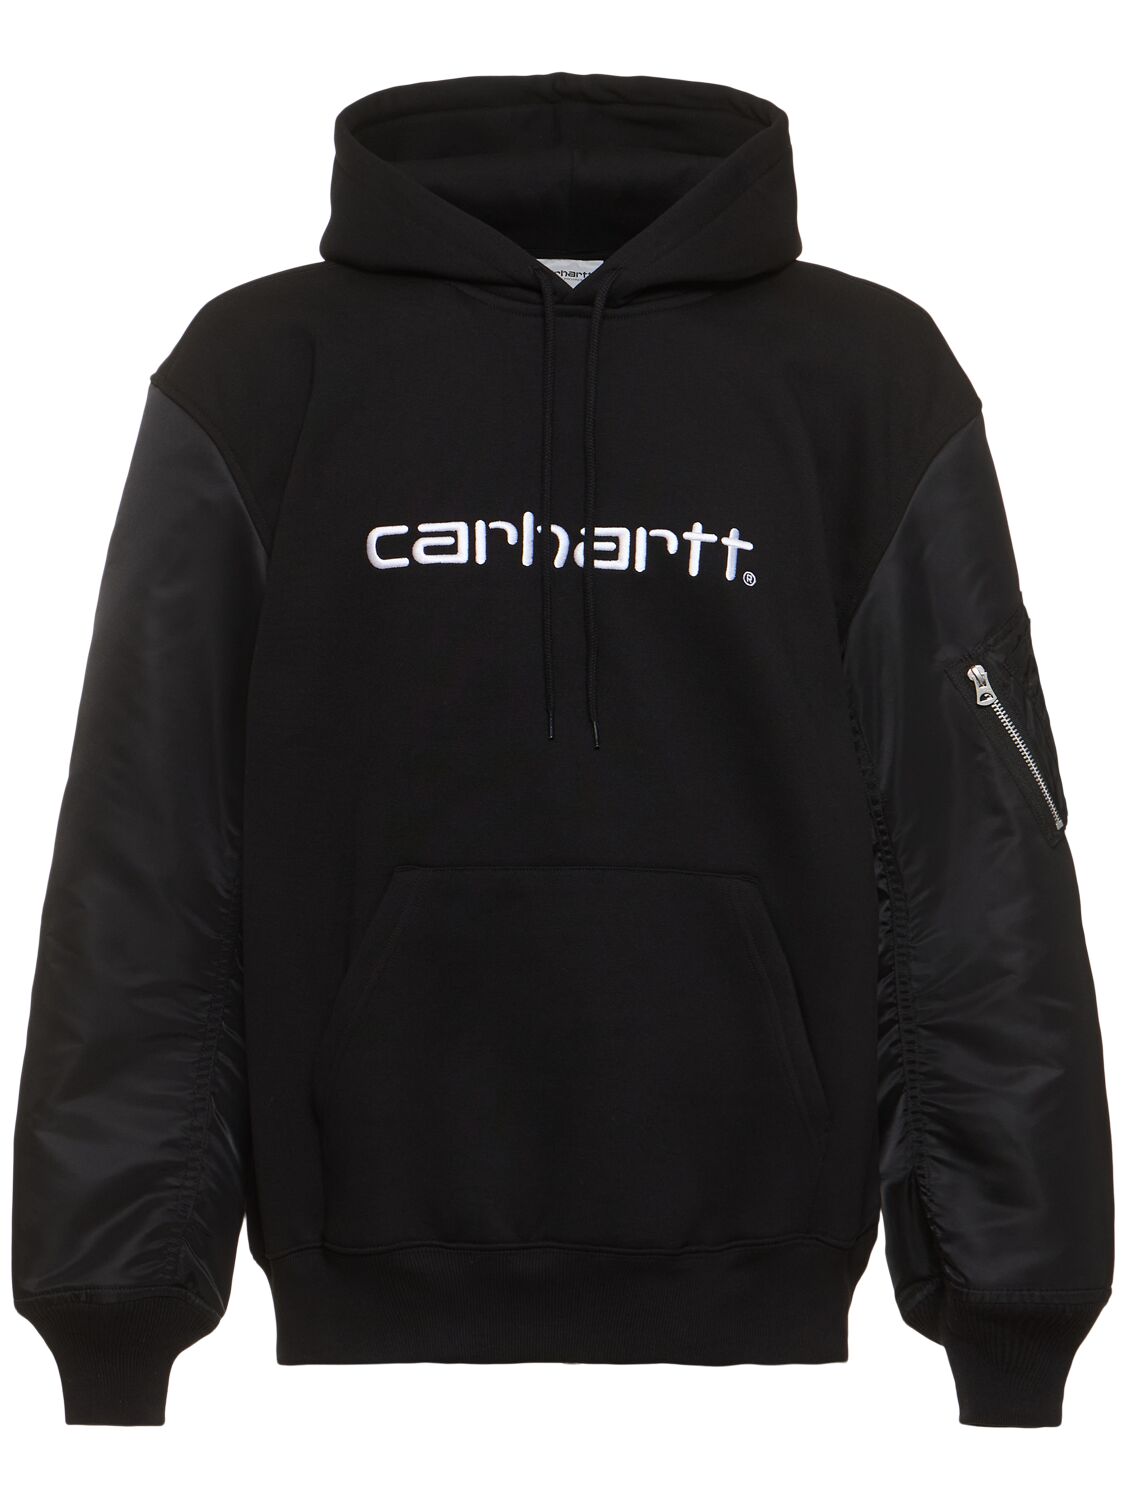 Image of Carhartt Customized Parka Hoodie